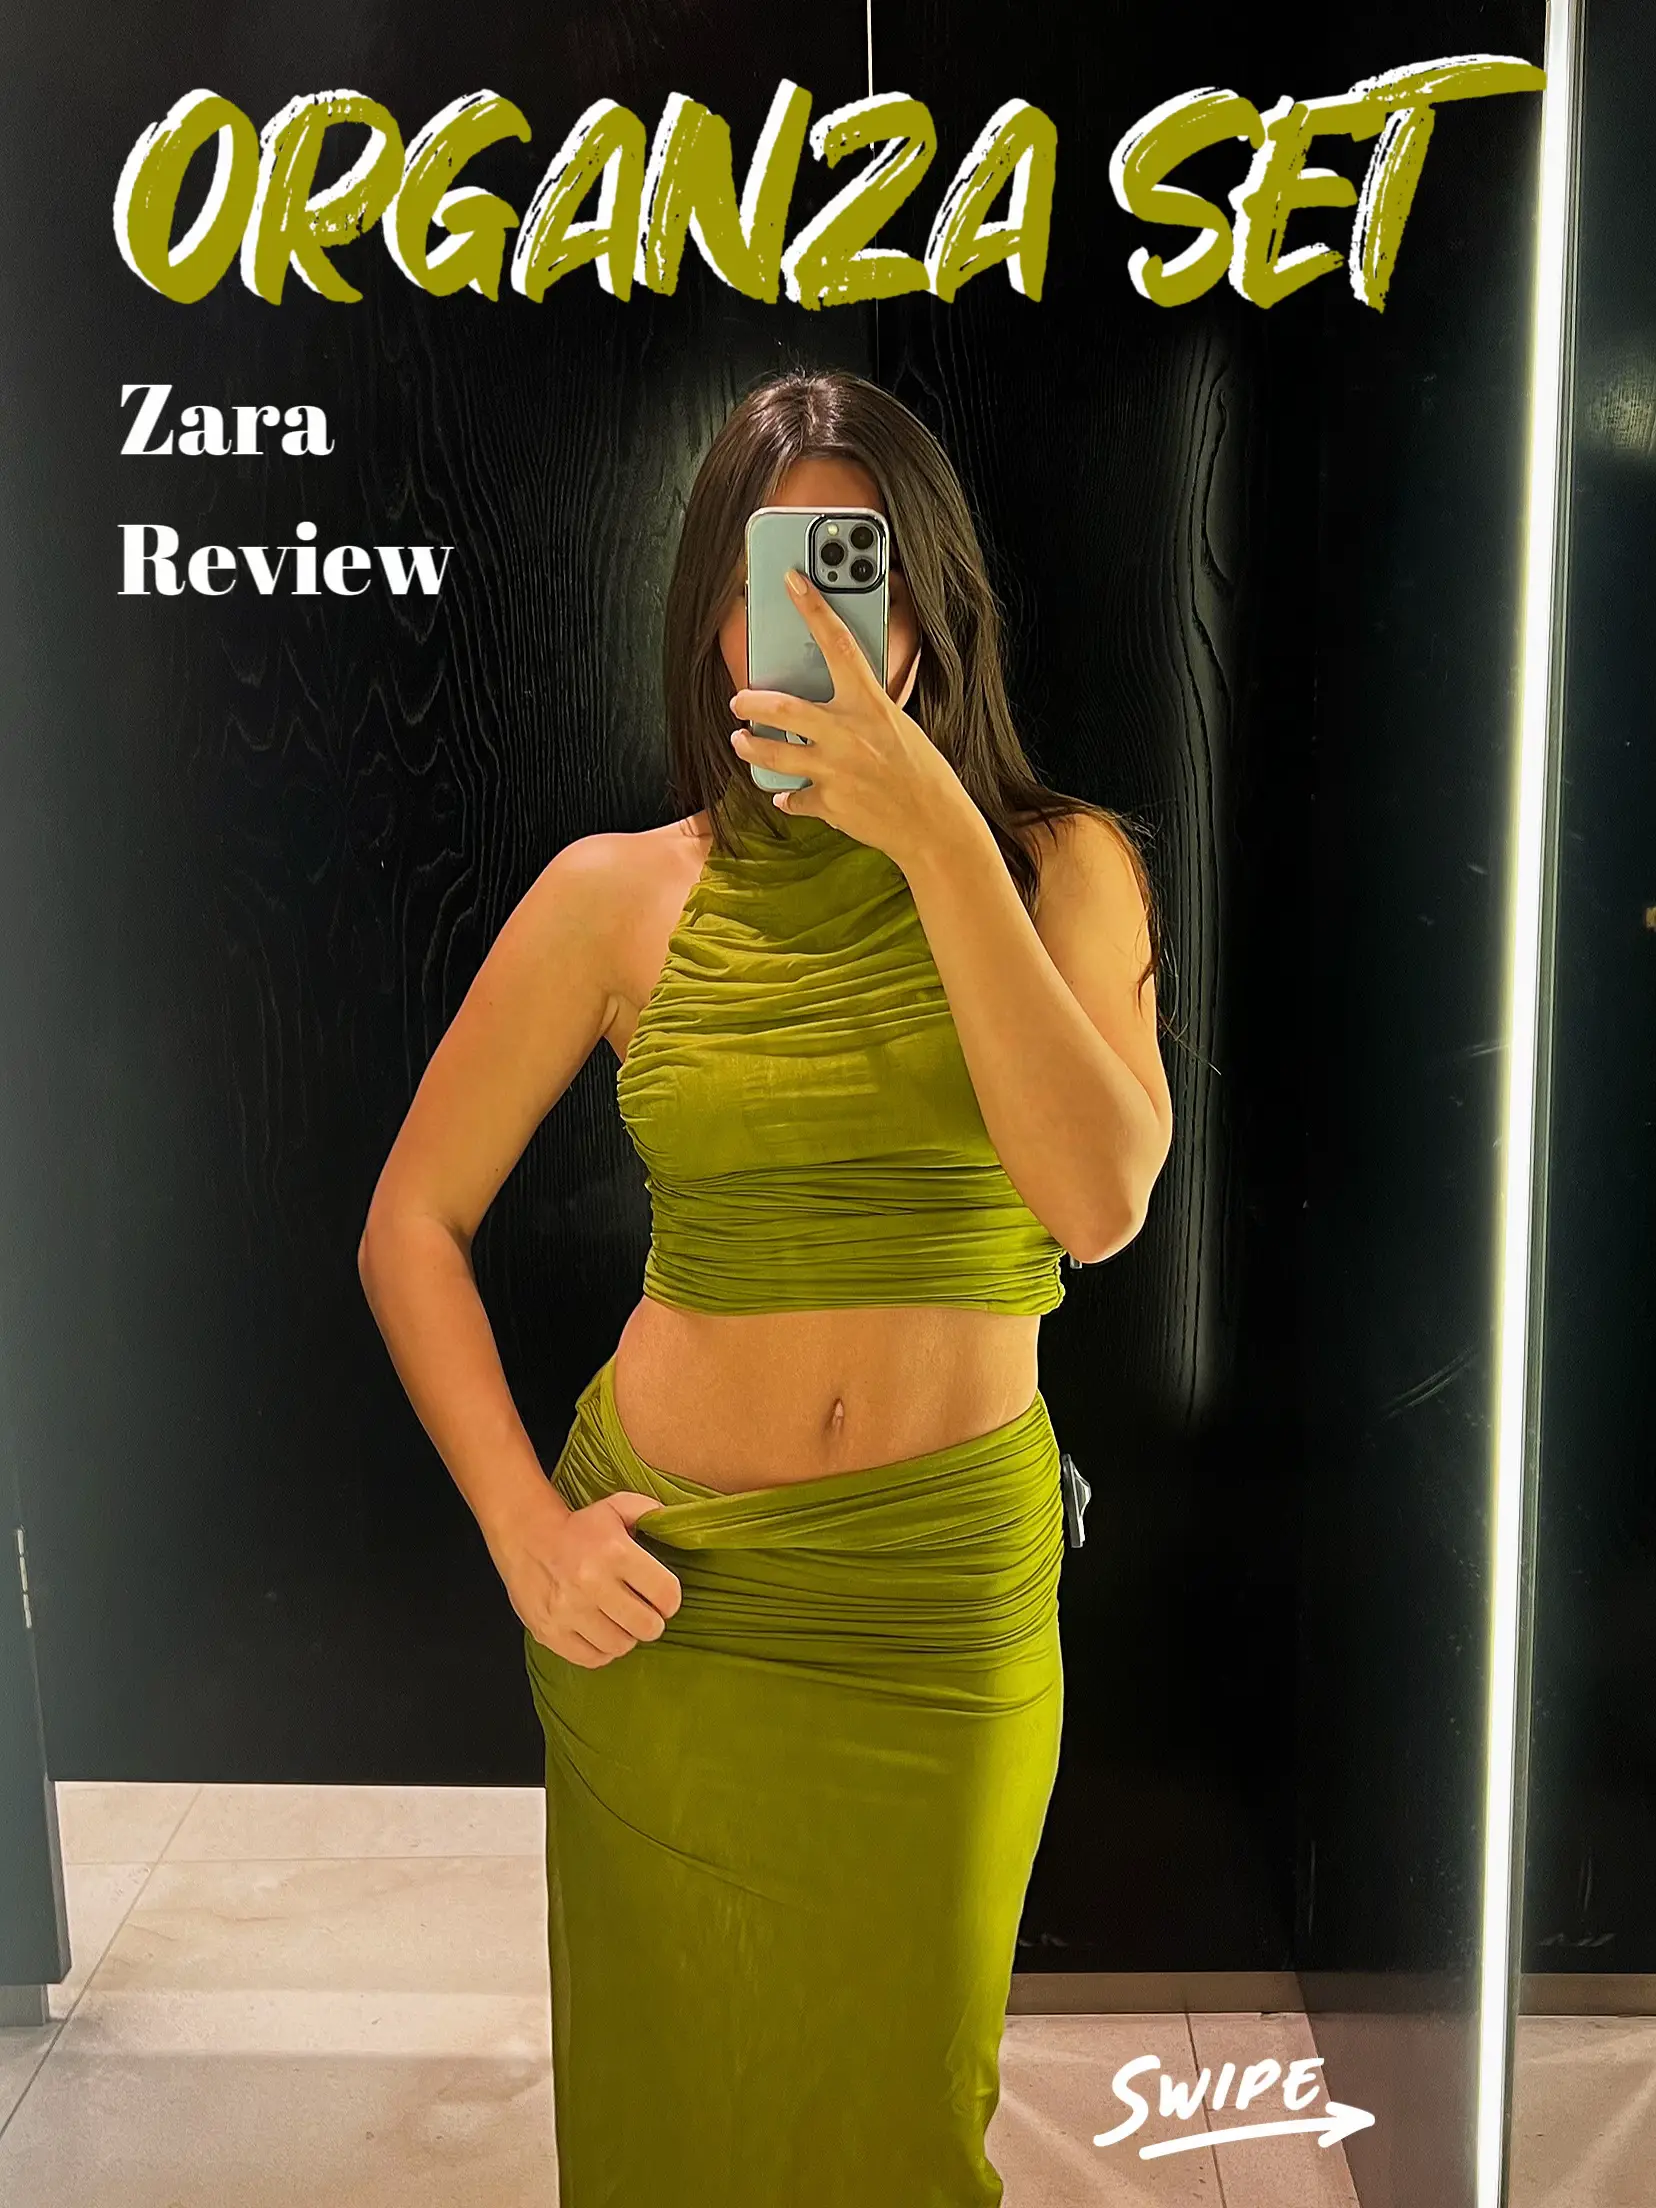 ZARA ORGANZA SET, REVIEW 🥑, Gallery posted by Sophia Stro